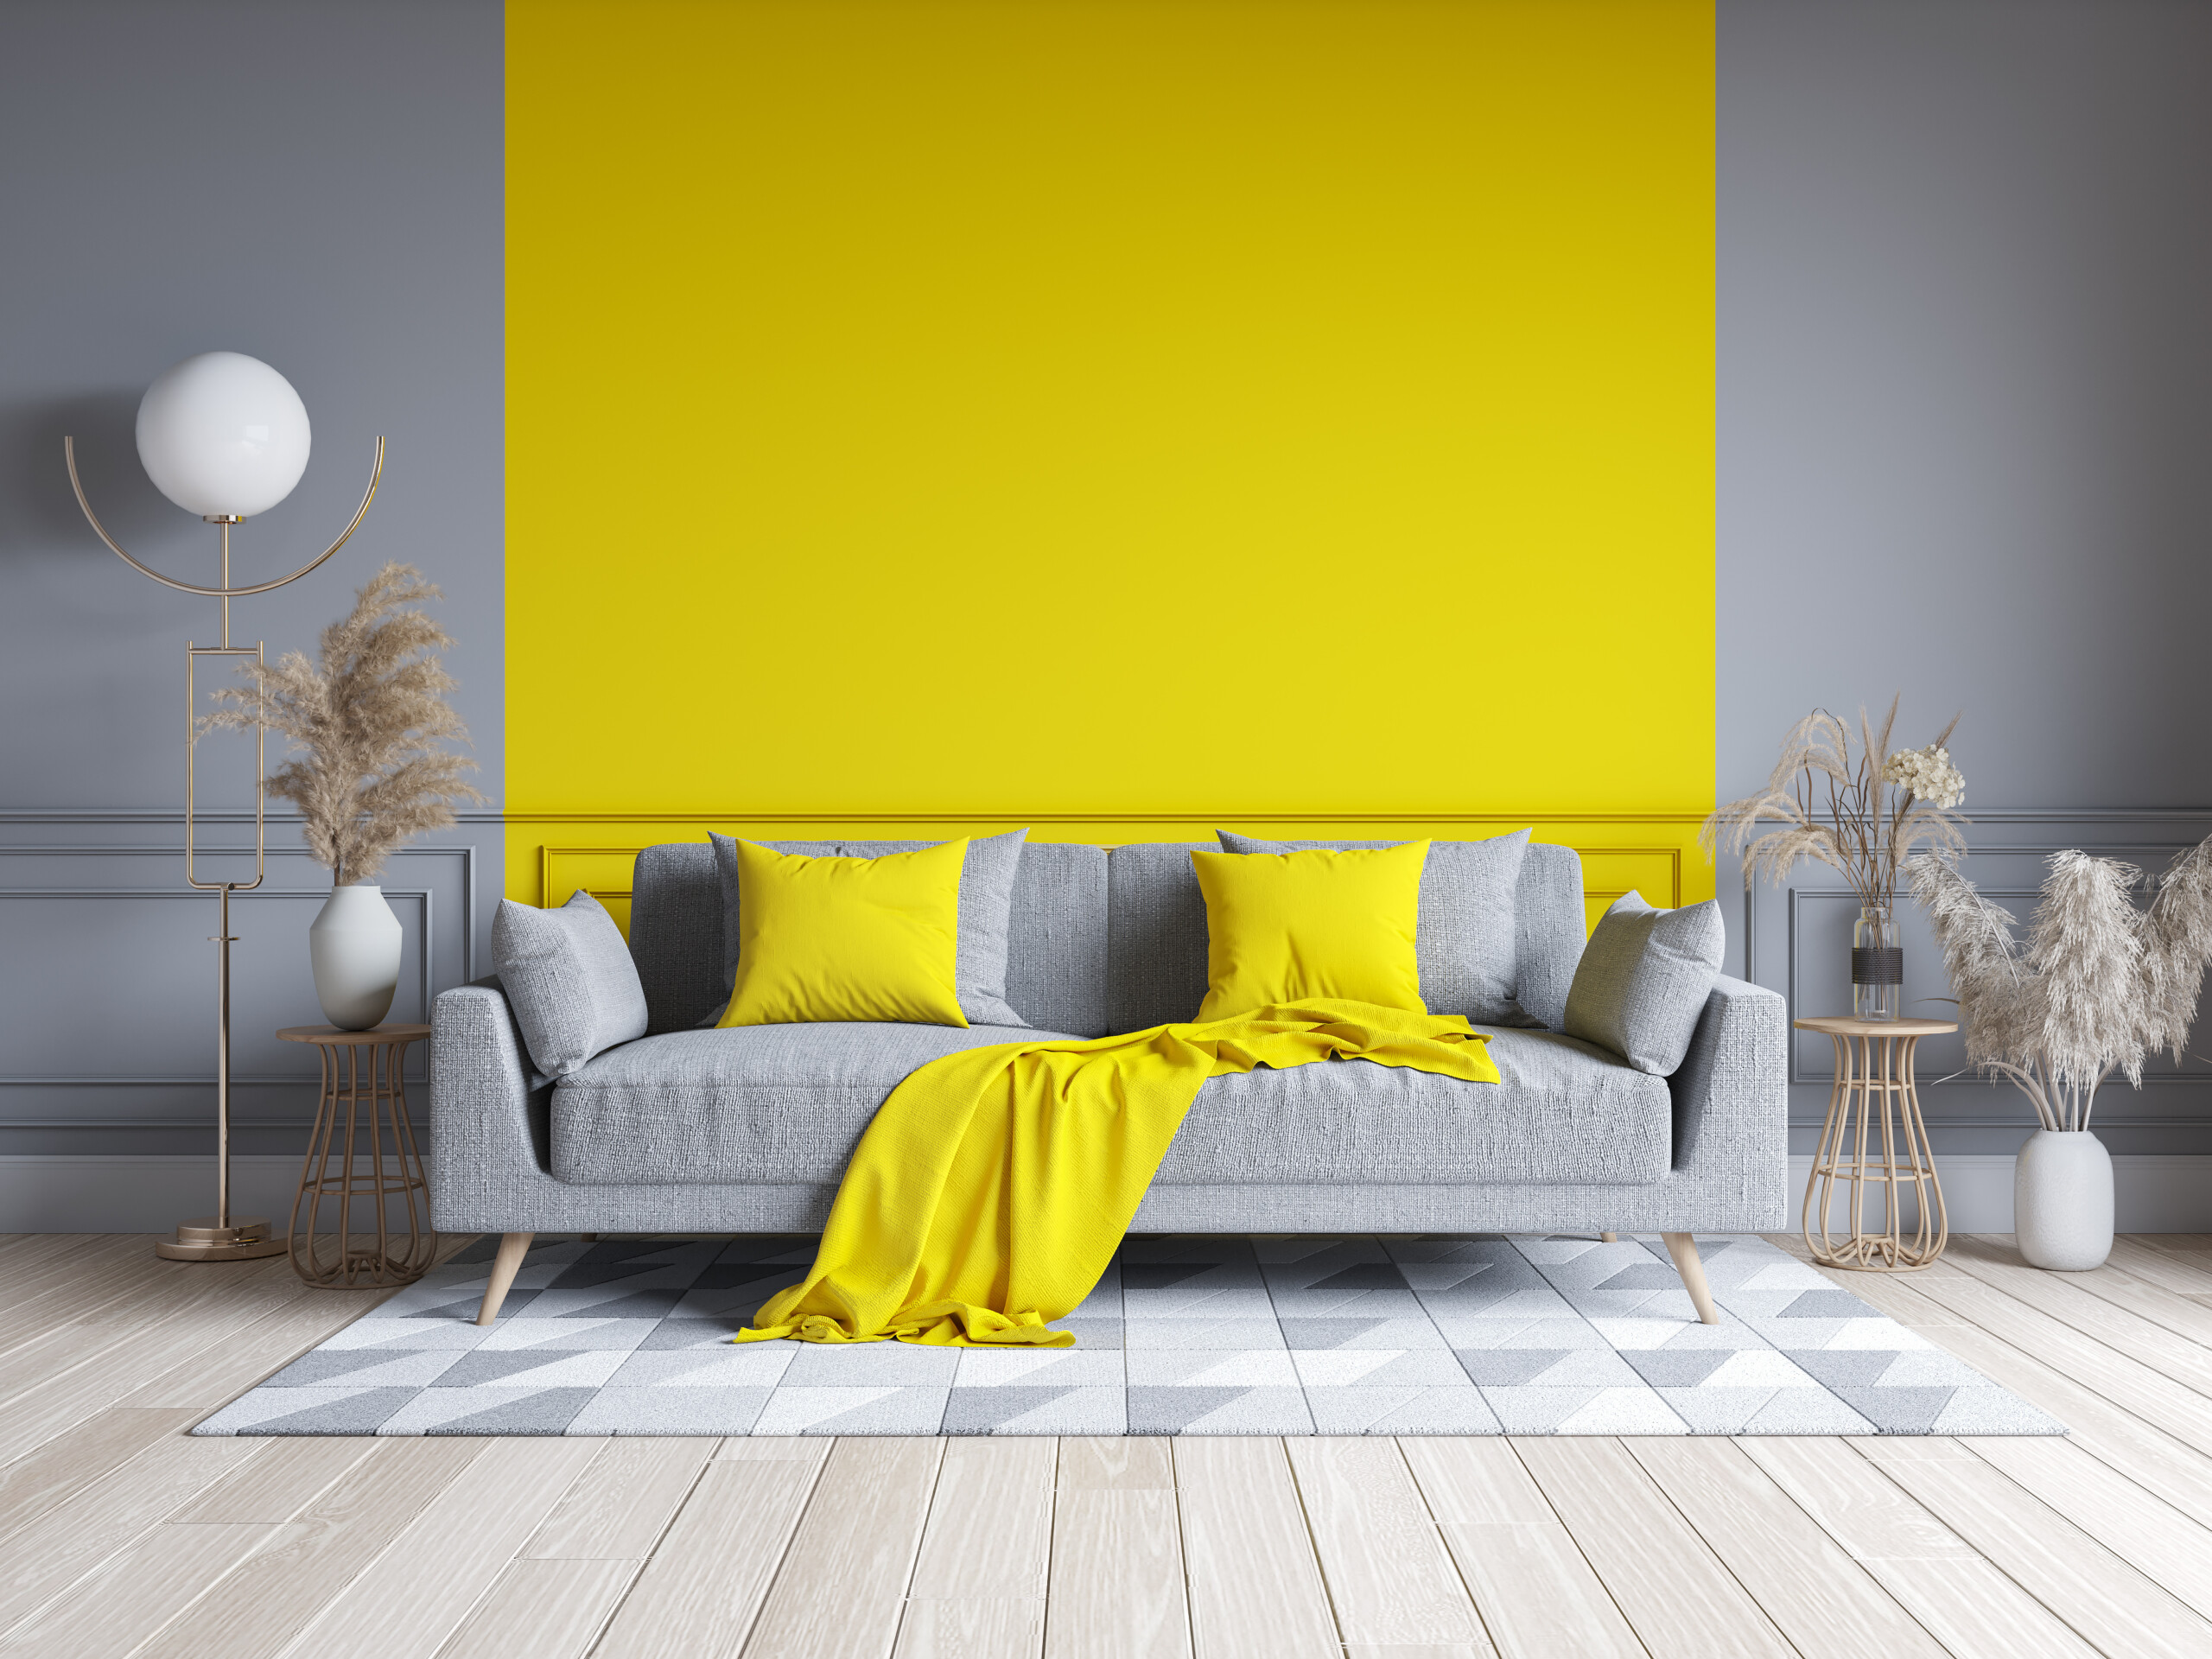 Yellow and Gray Colors for the Living Room